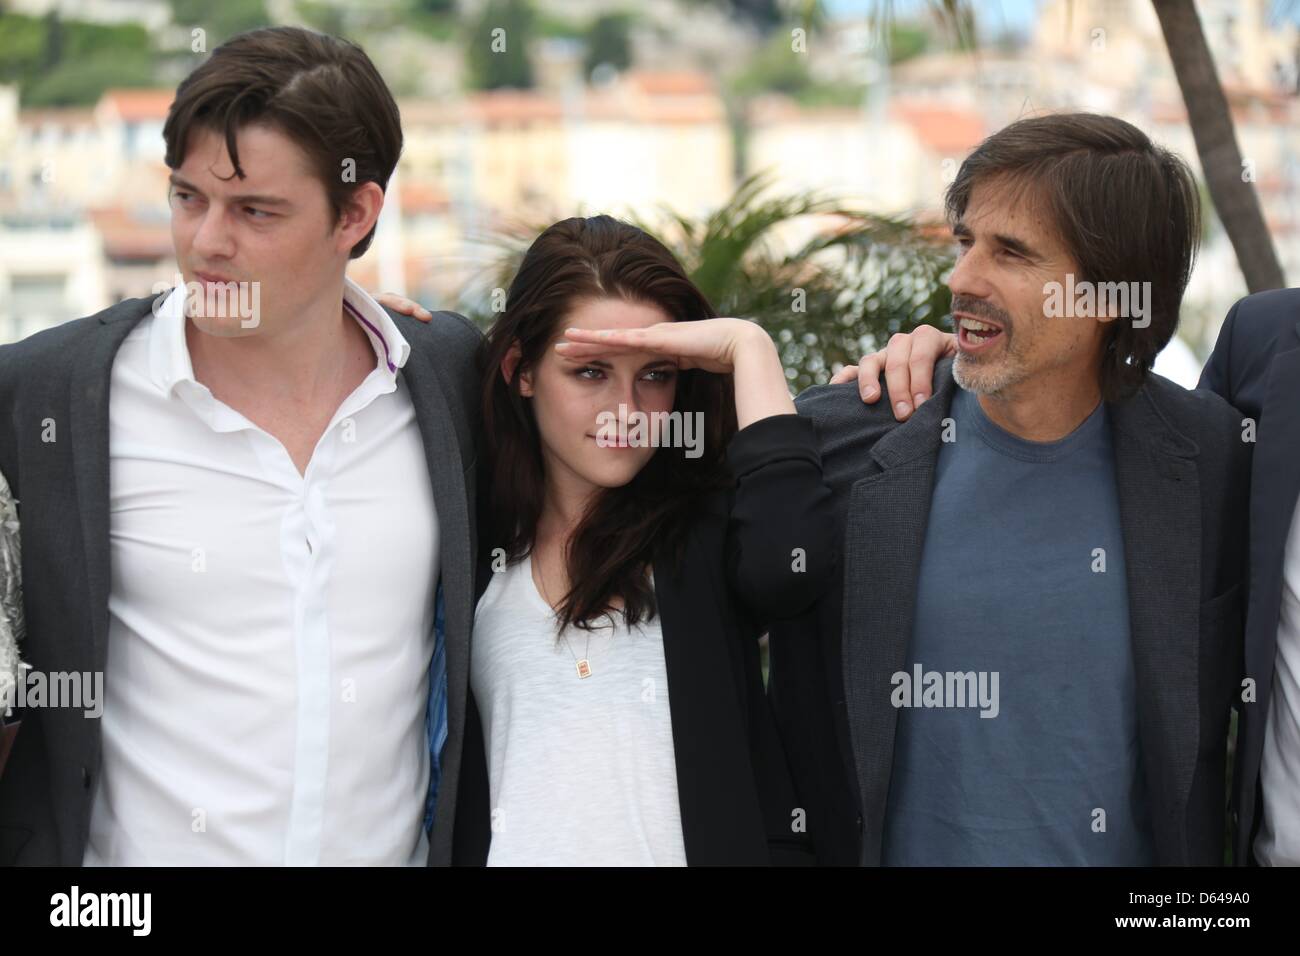 Actor Sam Riley, director Walter Salles and actress Kristen Stewart pose at the photocall of 'On The Road' during the 65th Cannes Film Festival at Palais des Festivals in Cannes, France, on 23 May 2012. Photo: Hubert Boesl Stock Photo